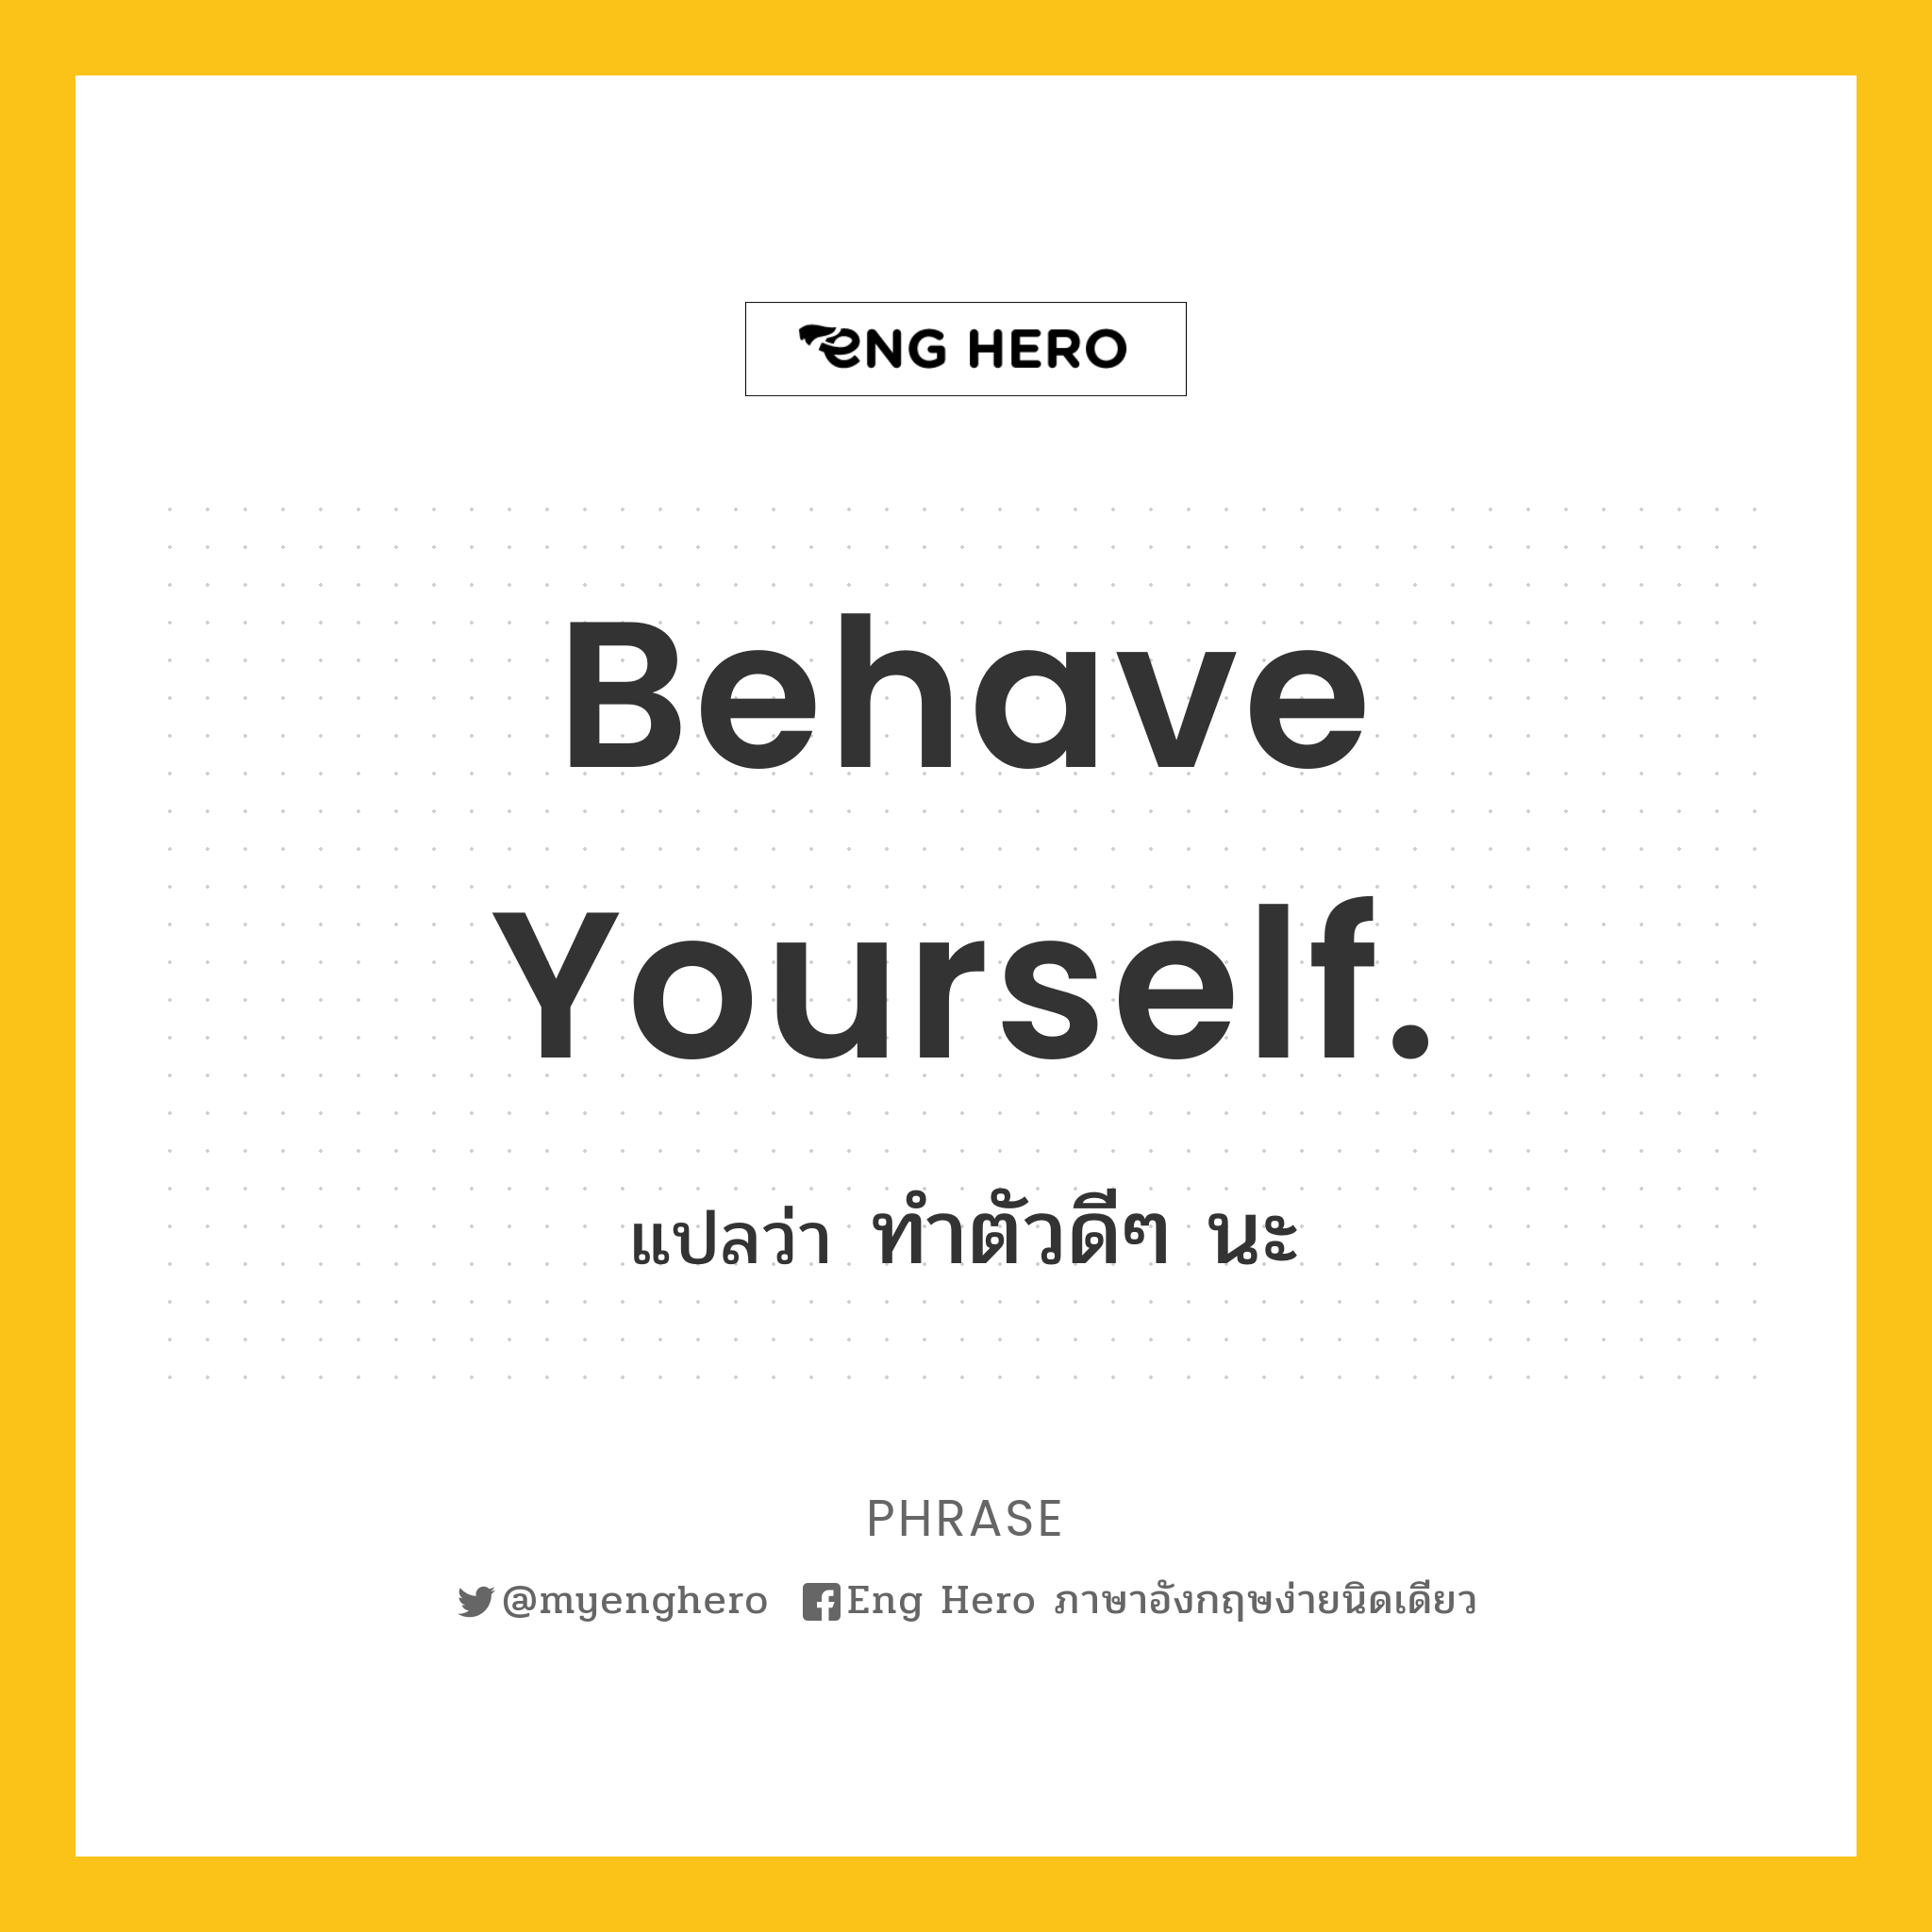 Behave yourself.